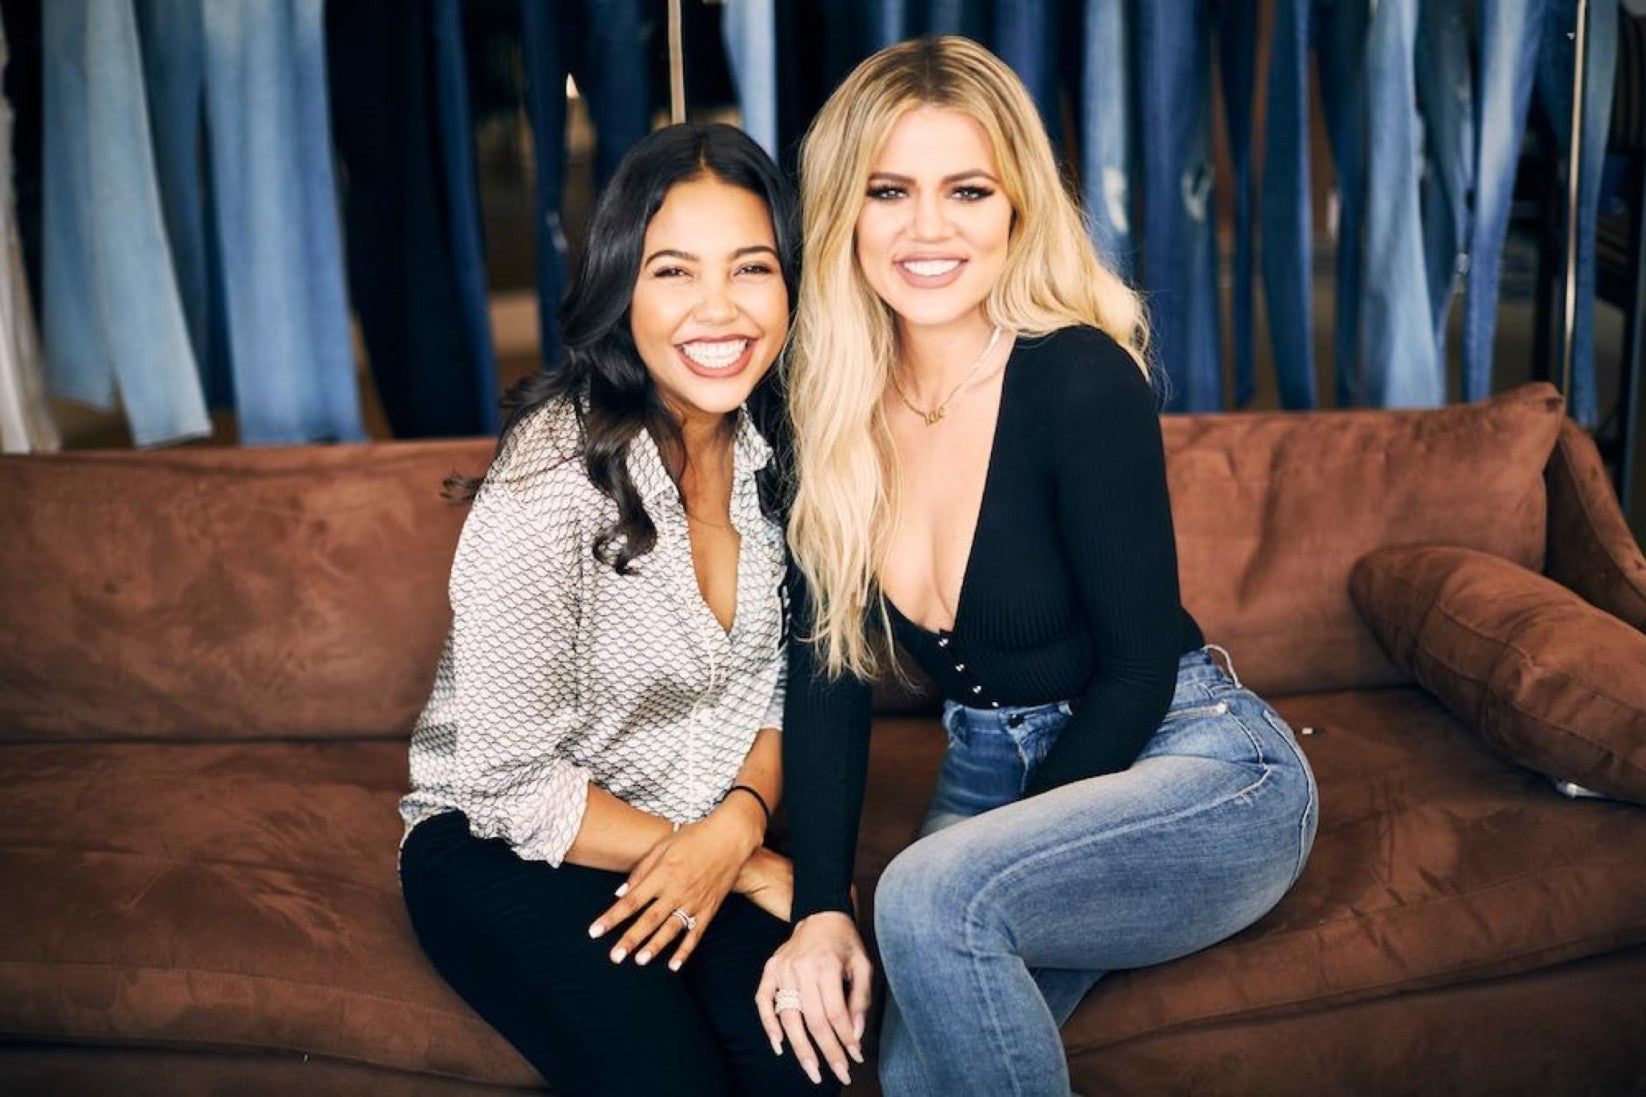 Good American co-founders Emma Grede and Khloe Kardashian smile as they sit on a fabric sofa.